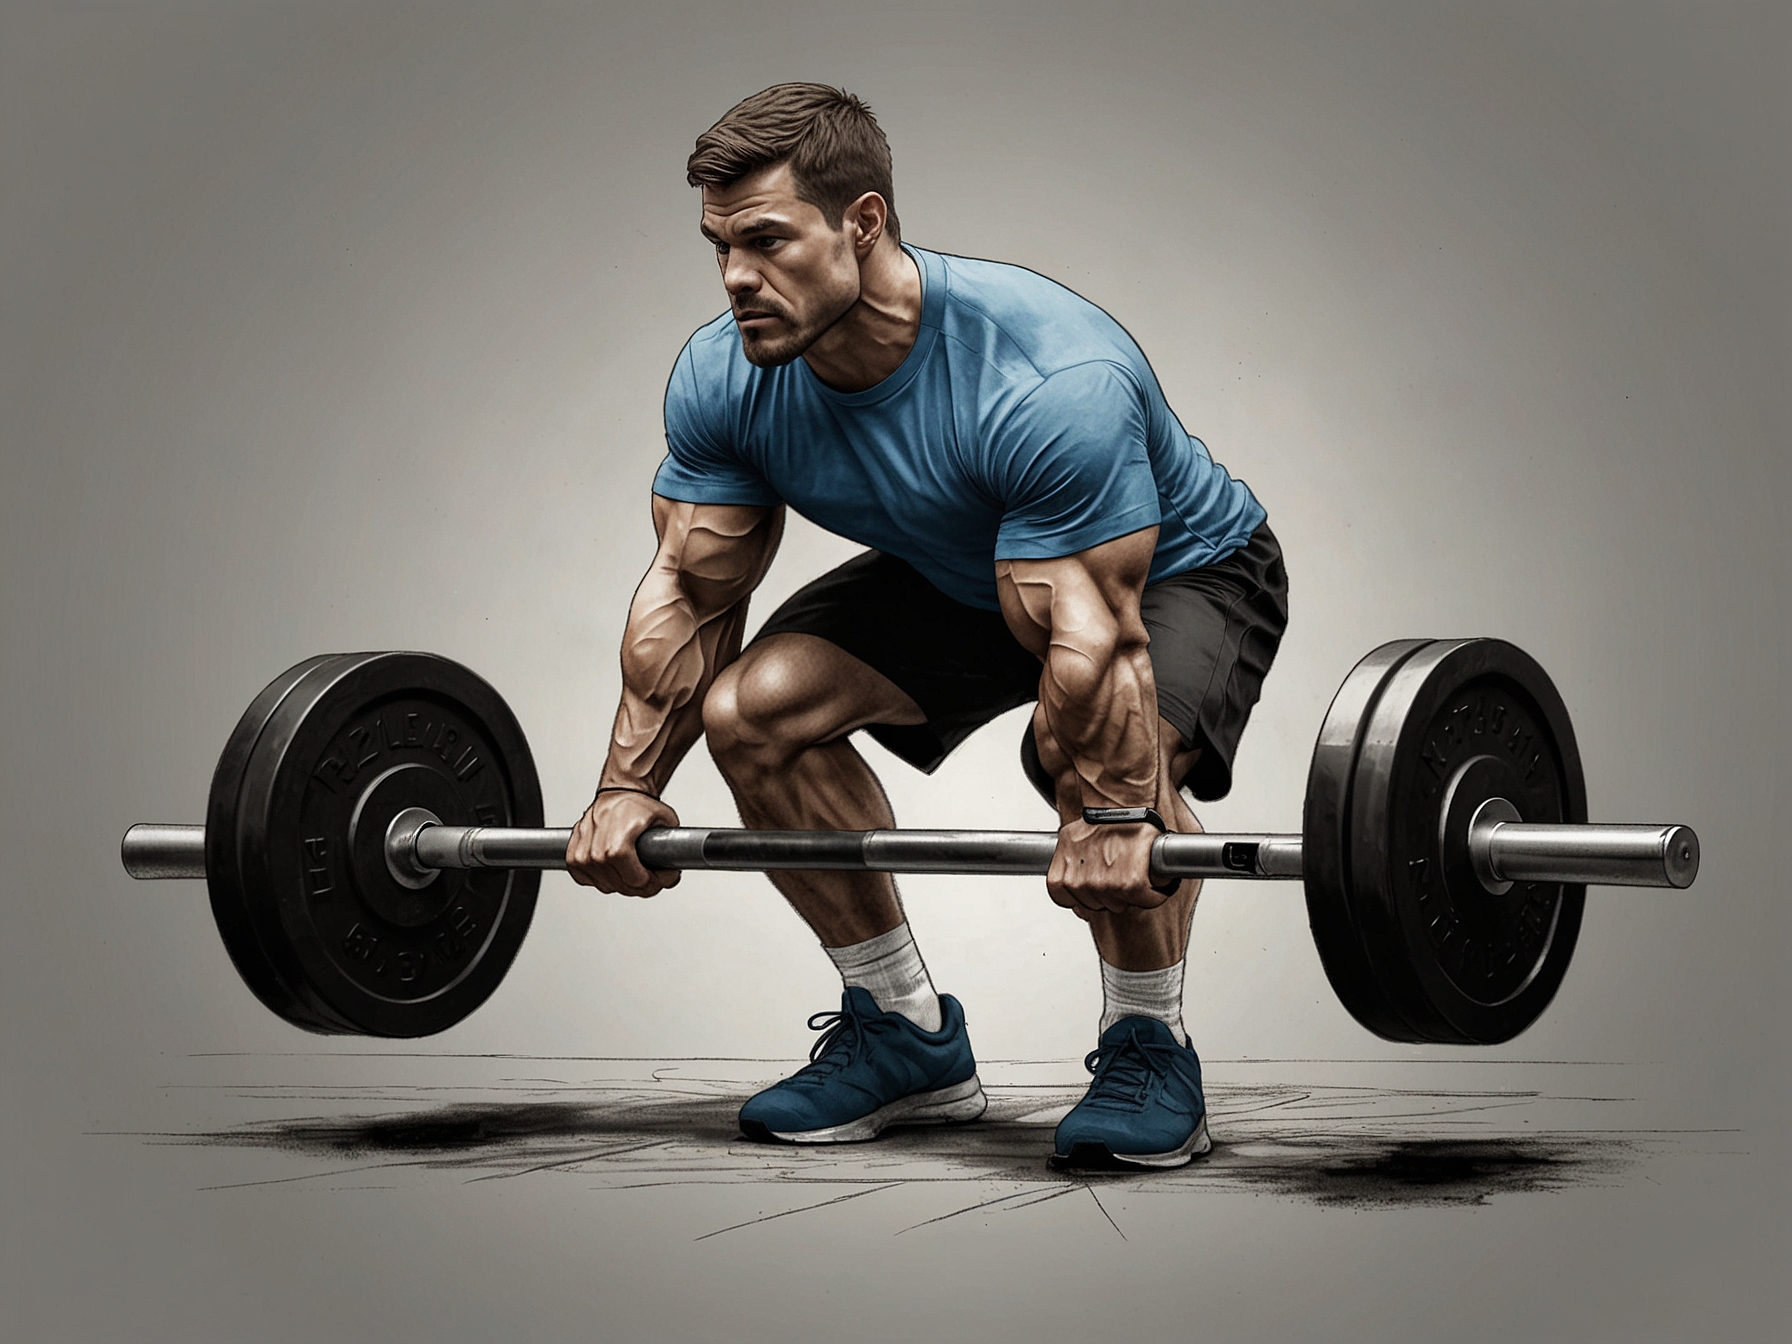 A person performing a dumbbell deadlift with correct form, focusing on engaging their hamstrings, glutes, and lower back while maintaining core stability.